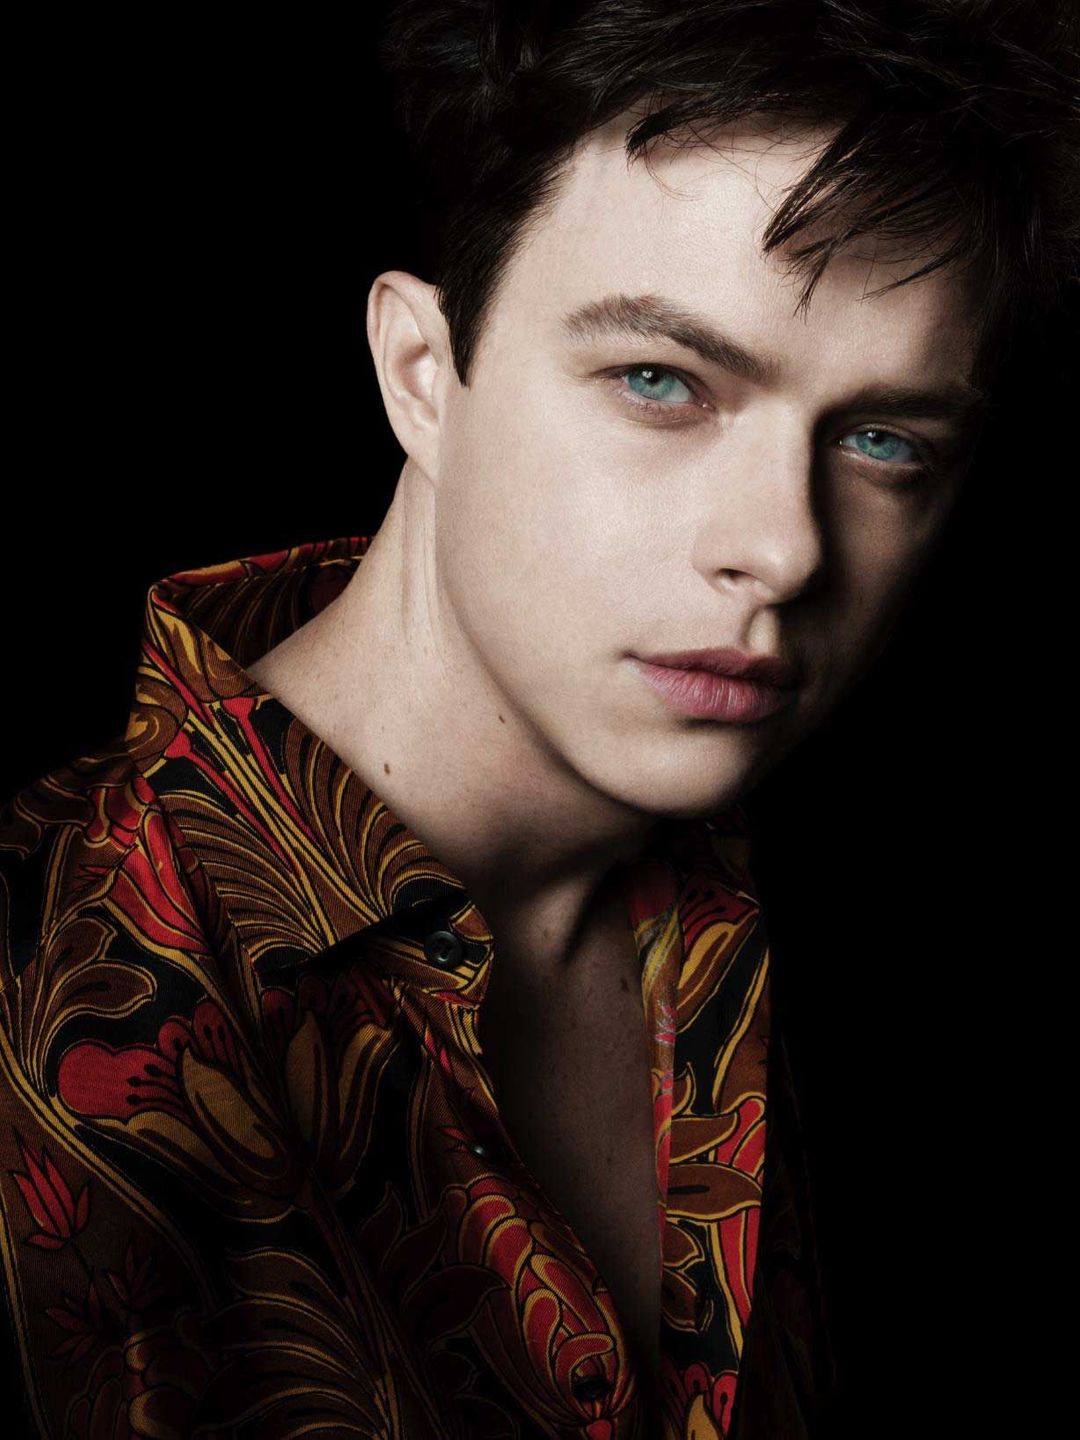 Dane DeHaan who is his father